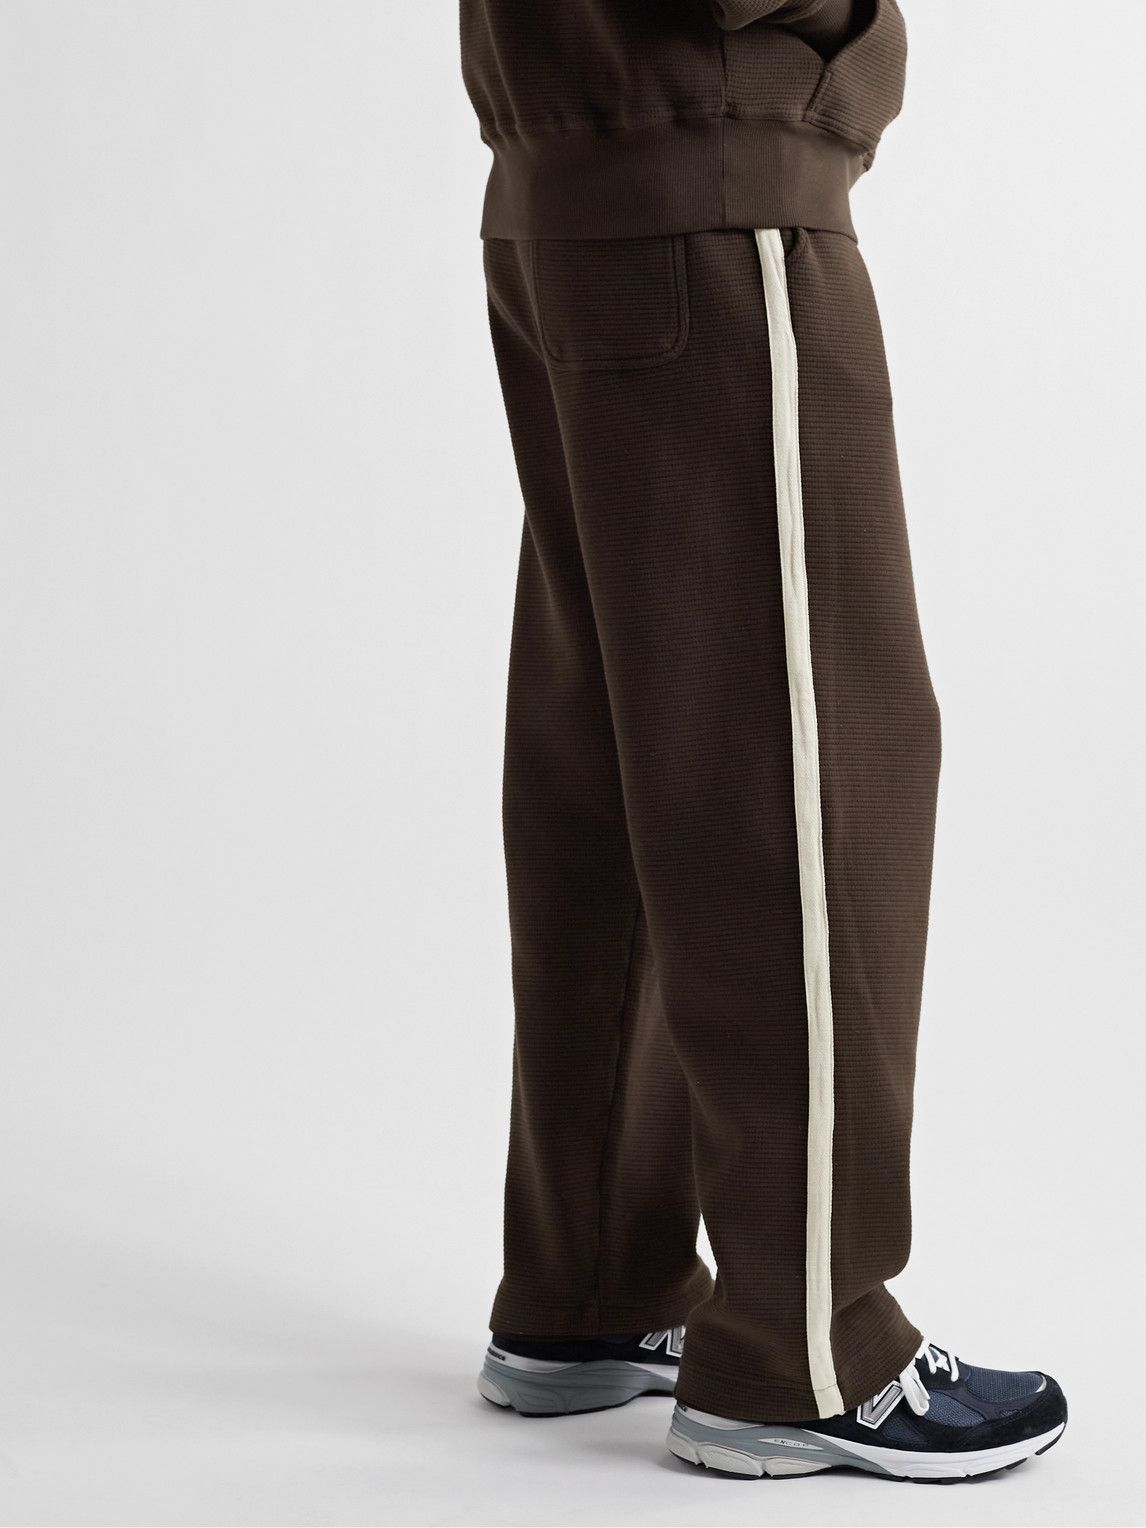 Oliver Spencer - Morwell Straight-Leg Waffle-Knit Organic Cotton Sweatpants - Brown